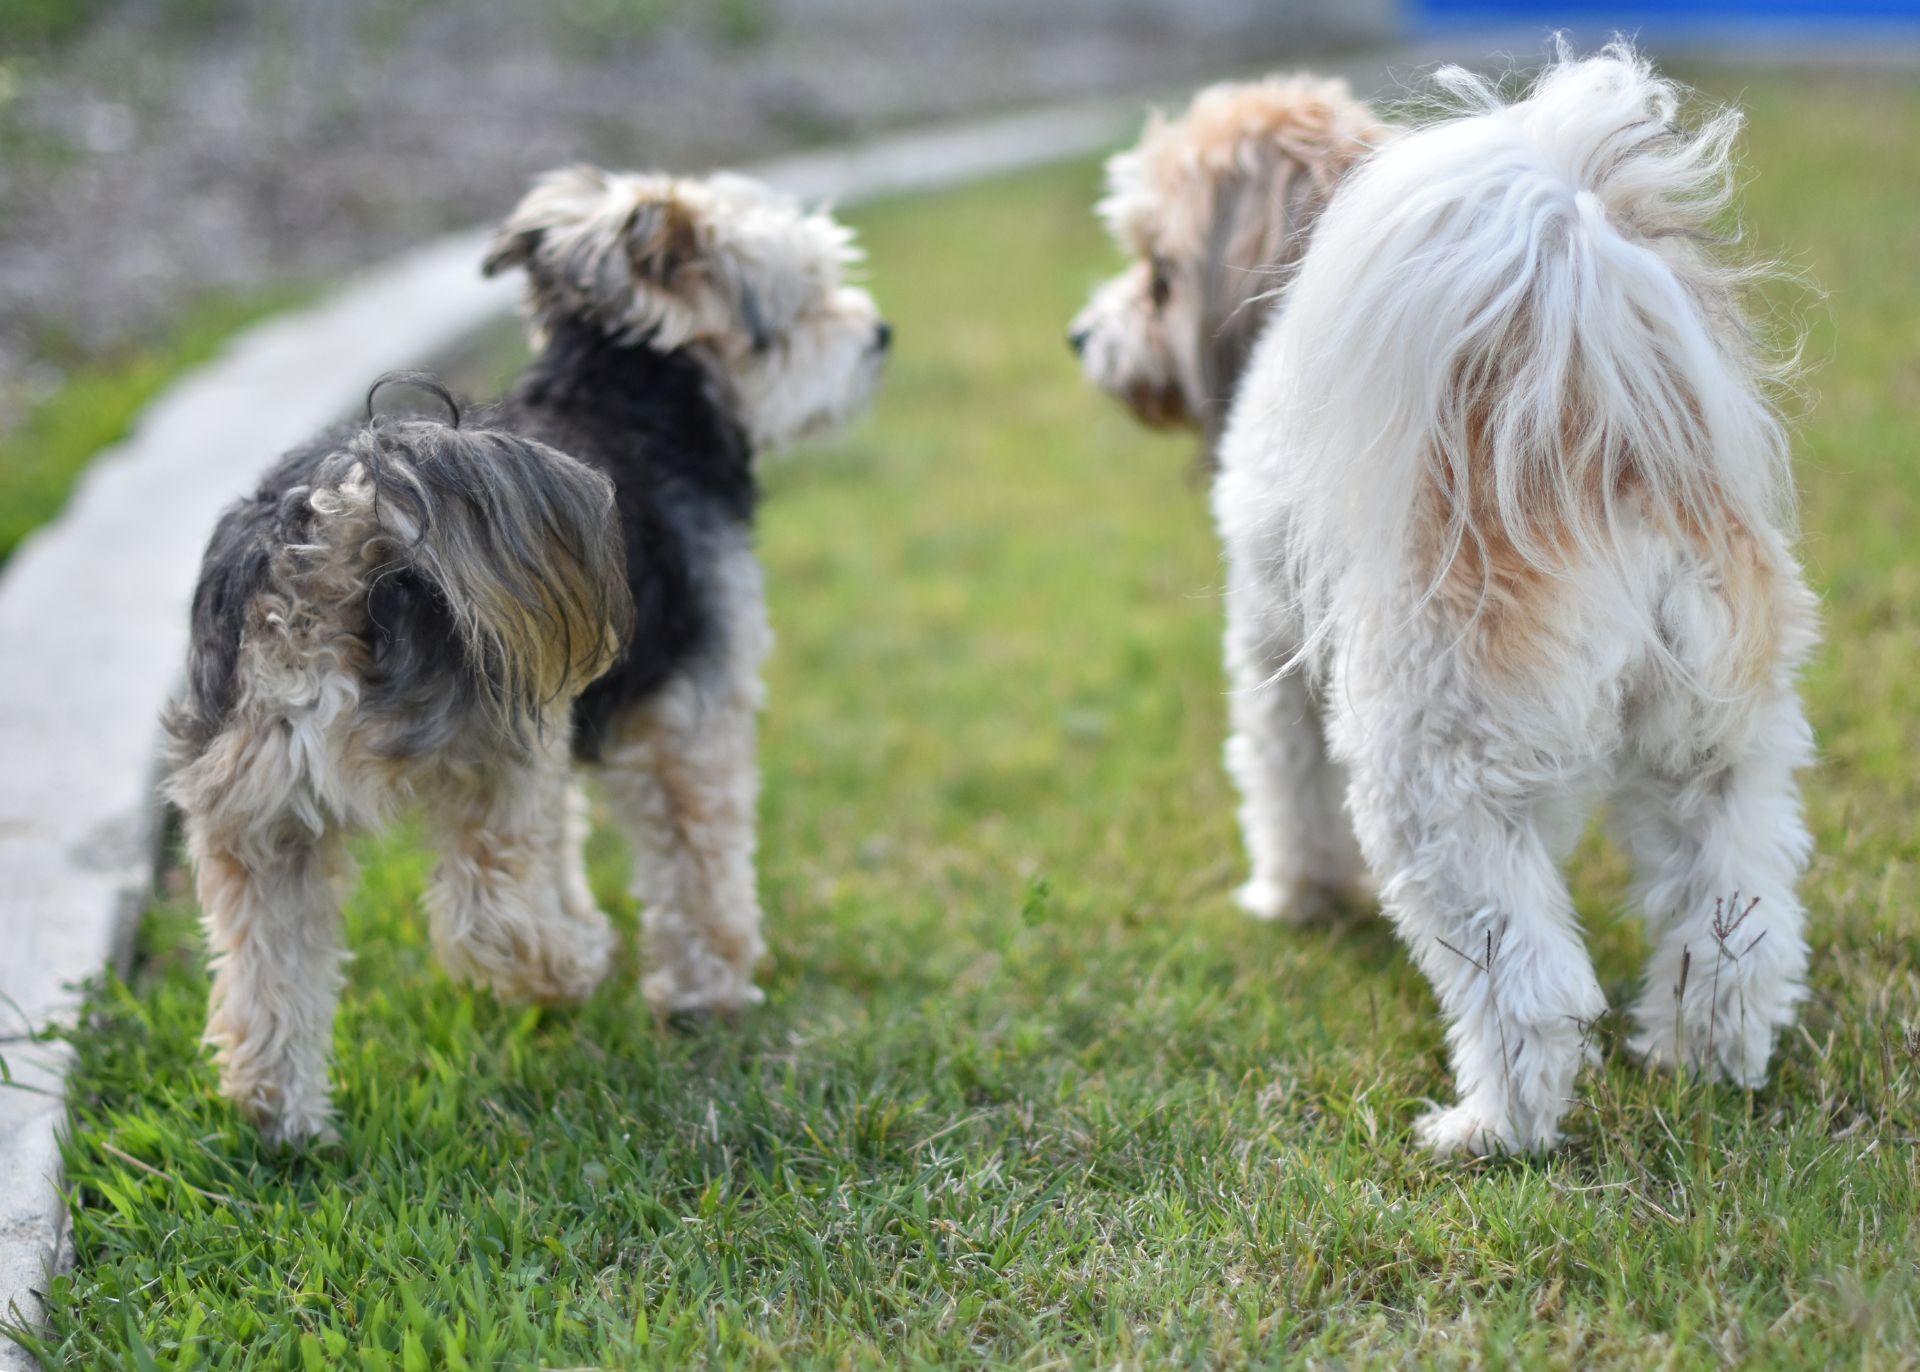 Small terrier and Havanese or Shih Tzu pictured from rear and about to greet each other on grassy lawn